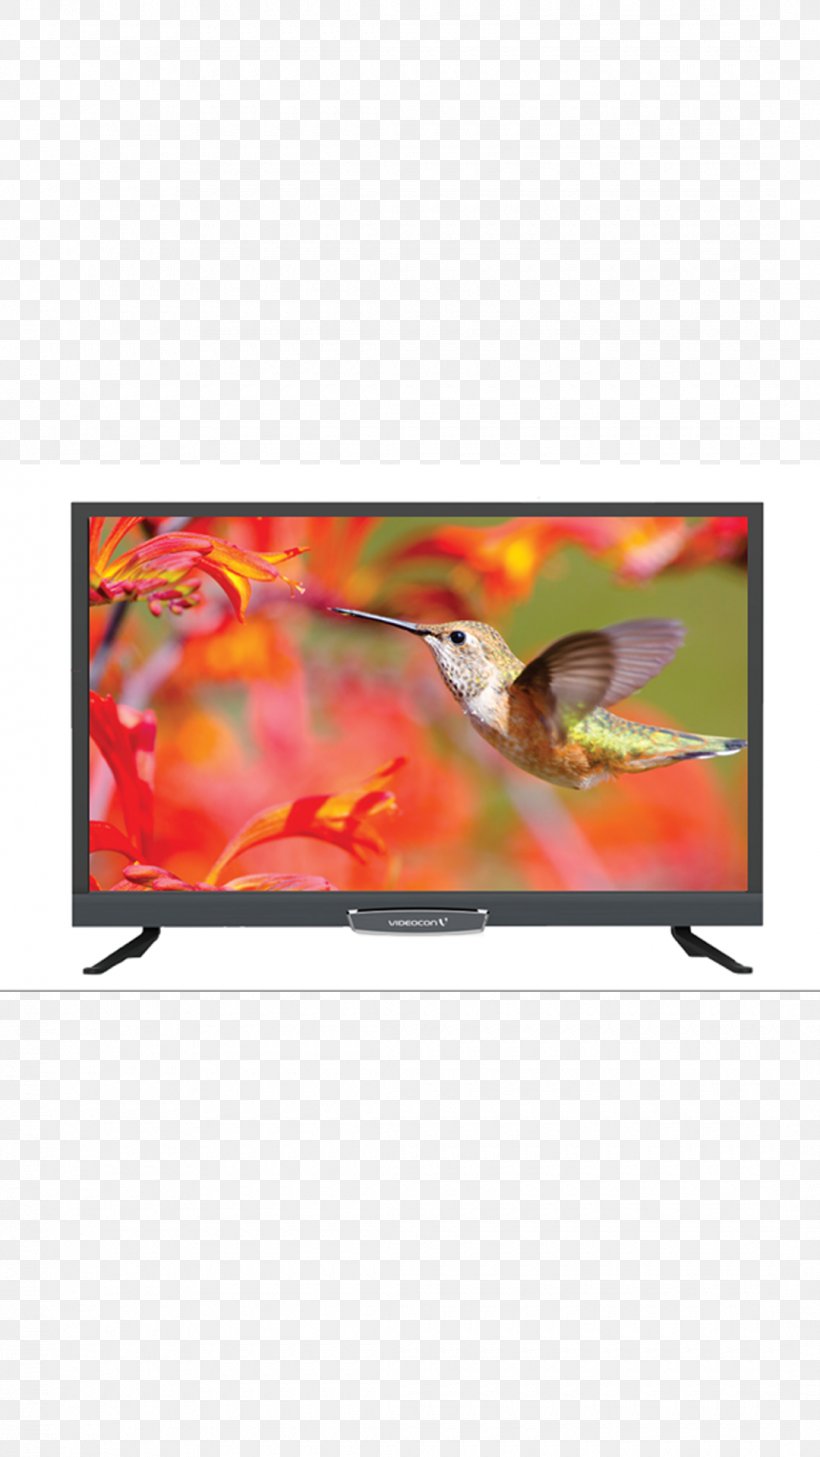 LED-backlit LCD Television Set HD Ready High-definition Television, PNG, 1080x1920px, Ledbacklit Lcd, Advertising, Bird, Consumer Electronics, Contrast Ratio Download Free